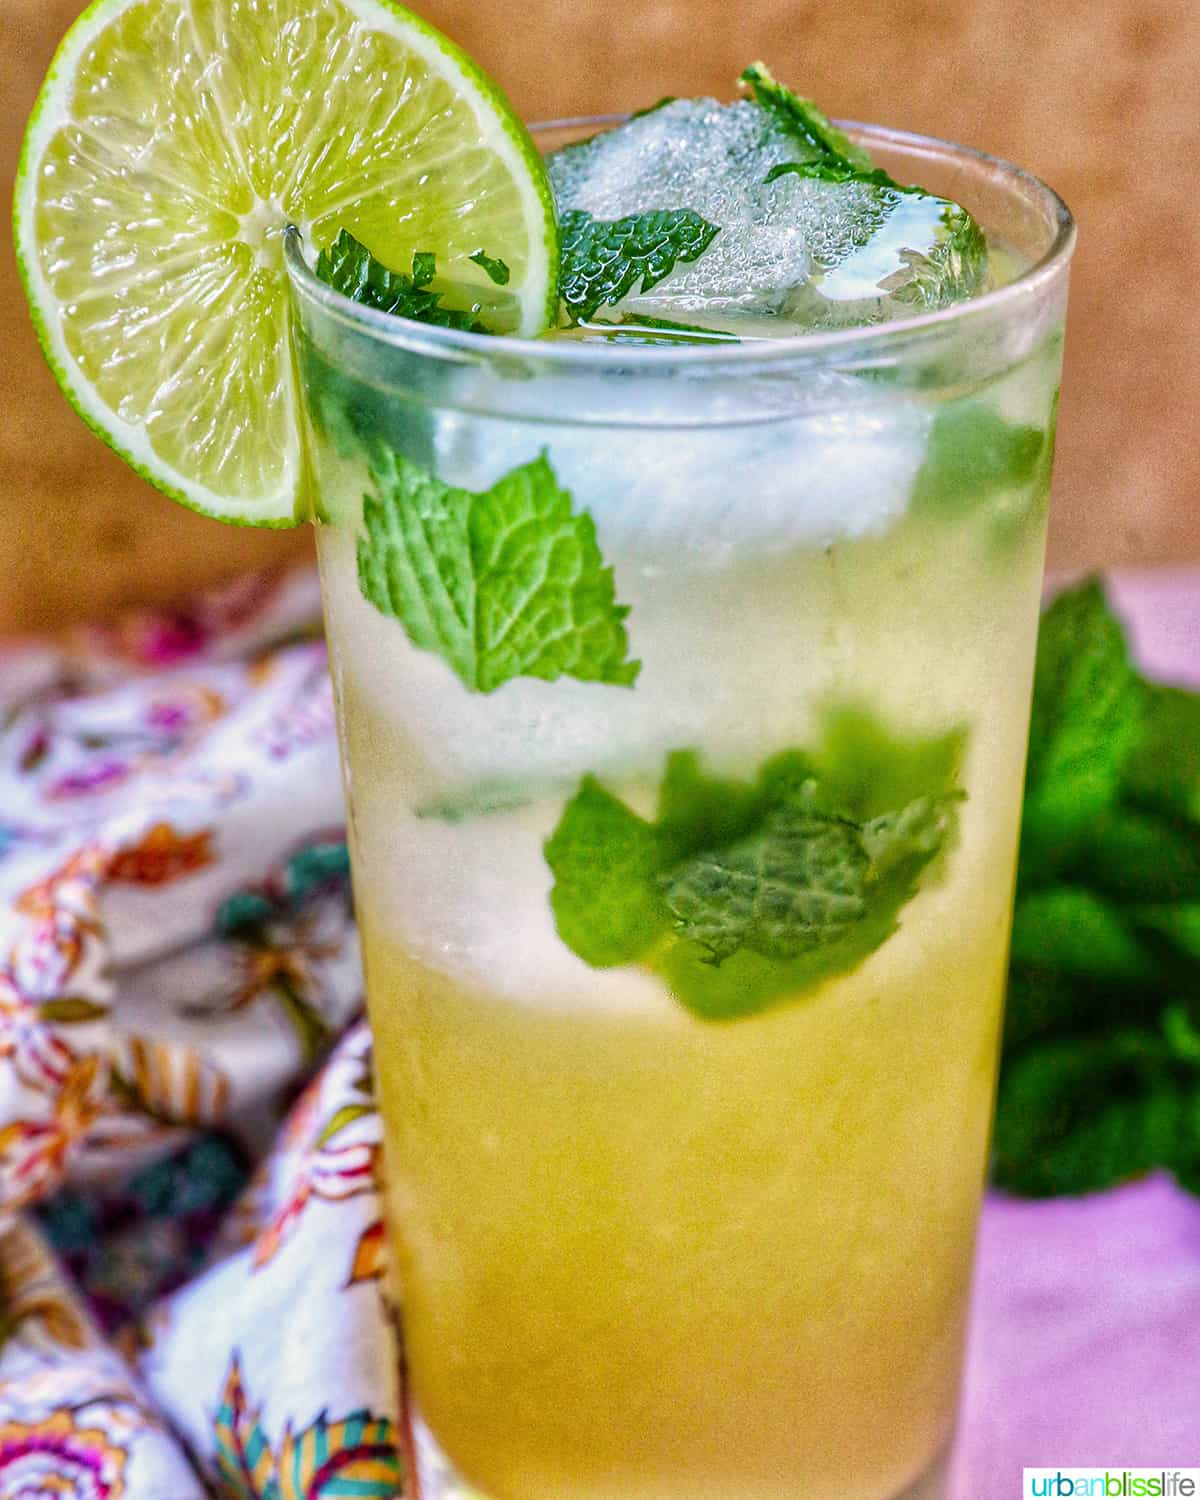 glass of Mango mojito with mint leaves, ice cubes, and a lime slice garnish.